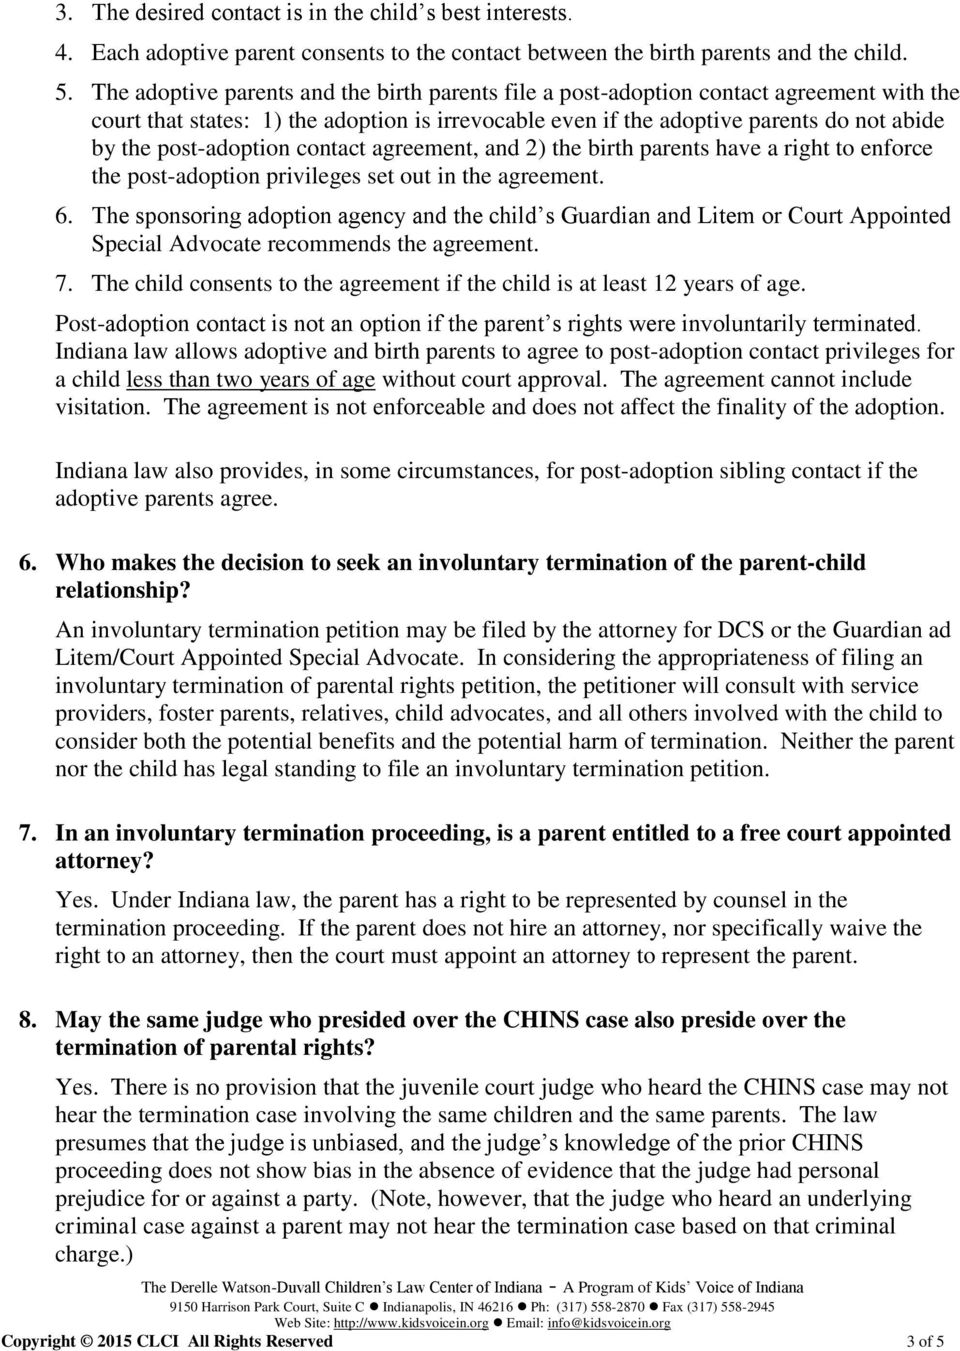 post-adoption contact agreement, and 2) the birth parents have a right to enforce the post-adoption privileges set out in the agreement. 6.